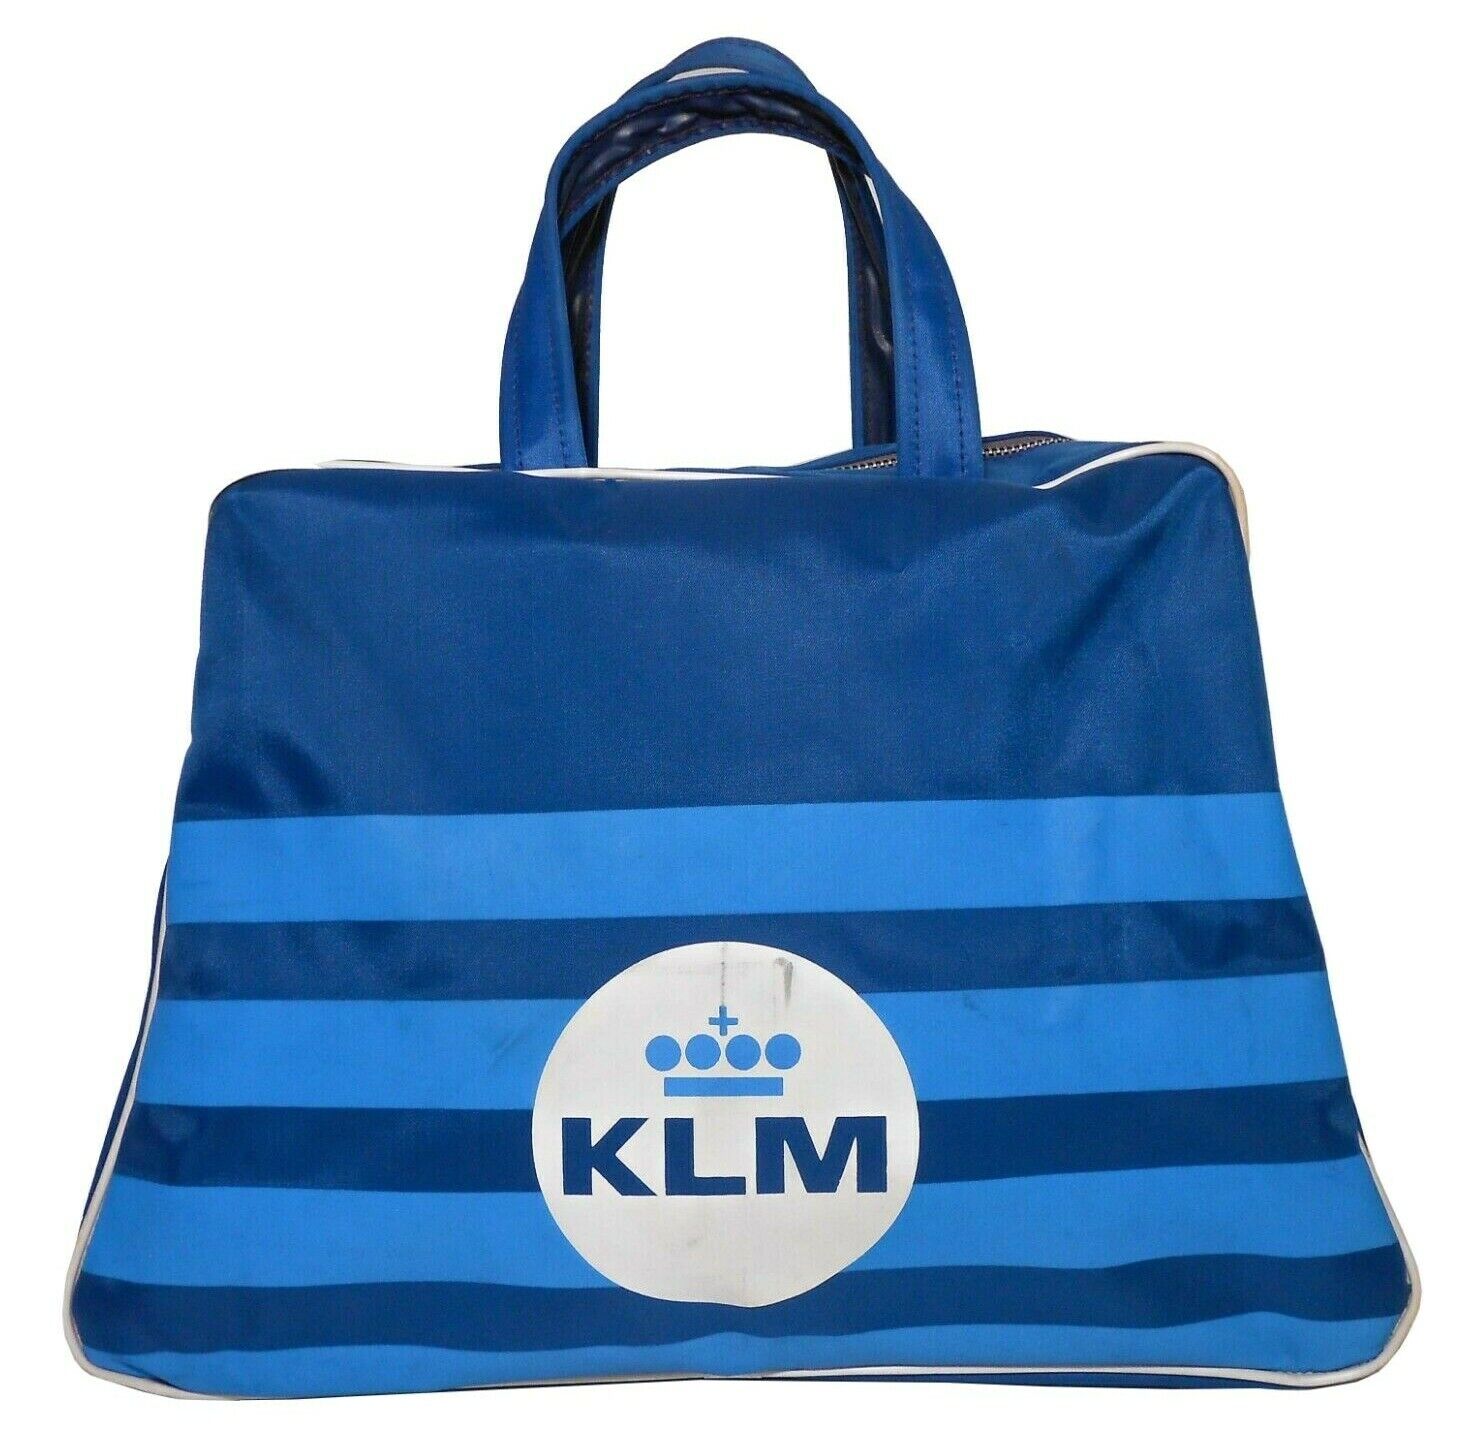 MID-20TH C VINT KLM ROYAL DUTCH AIRLINES CARRY-ON STRIPED SIZED FABRIC TOTE BAG